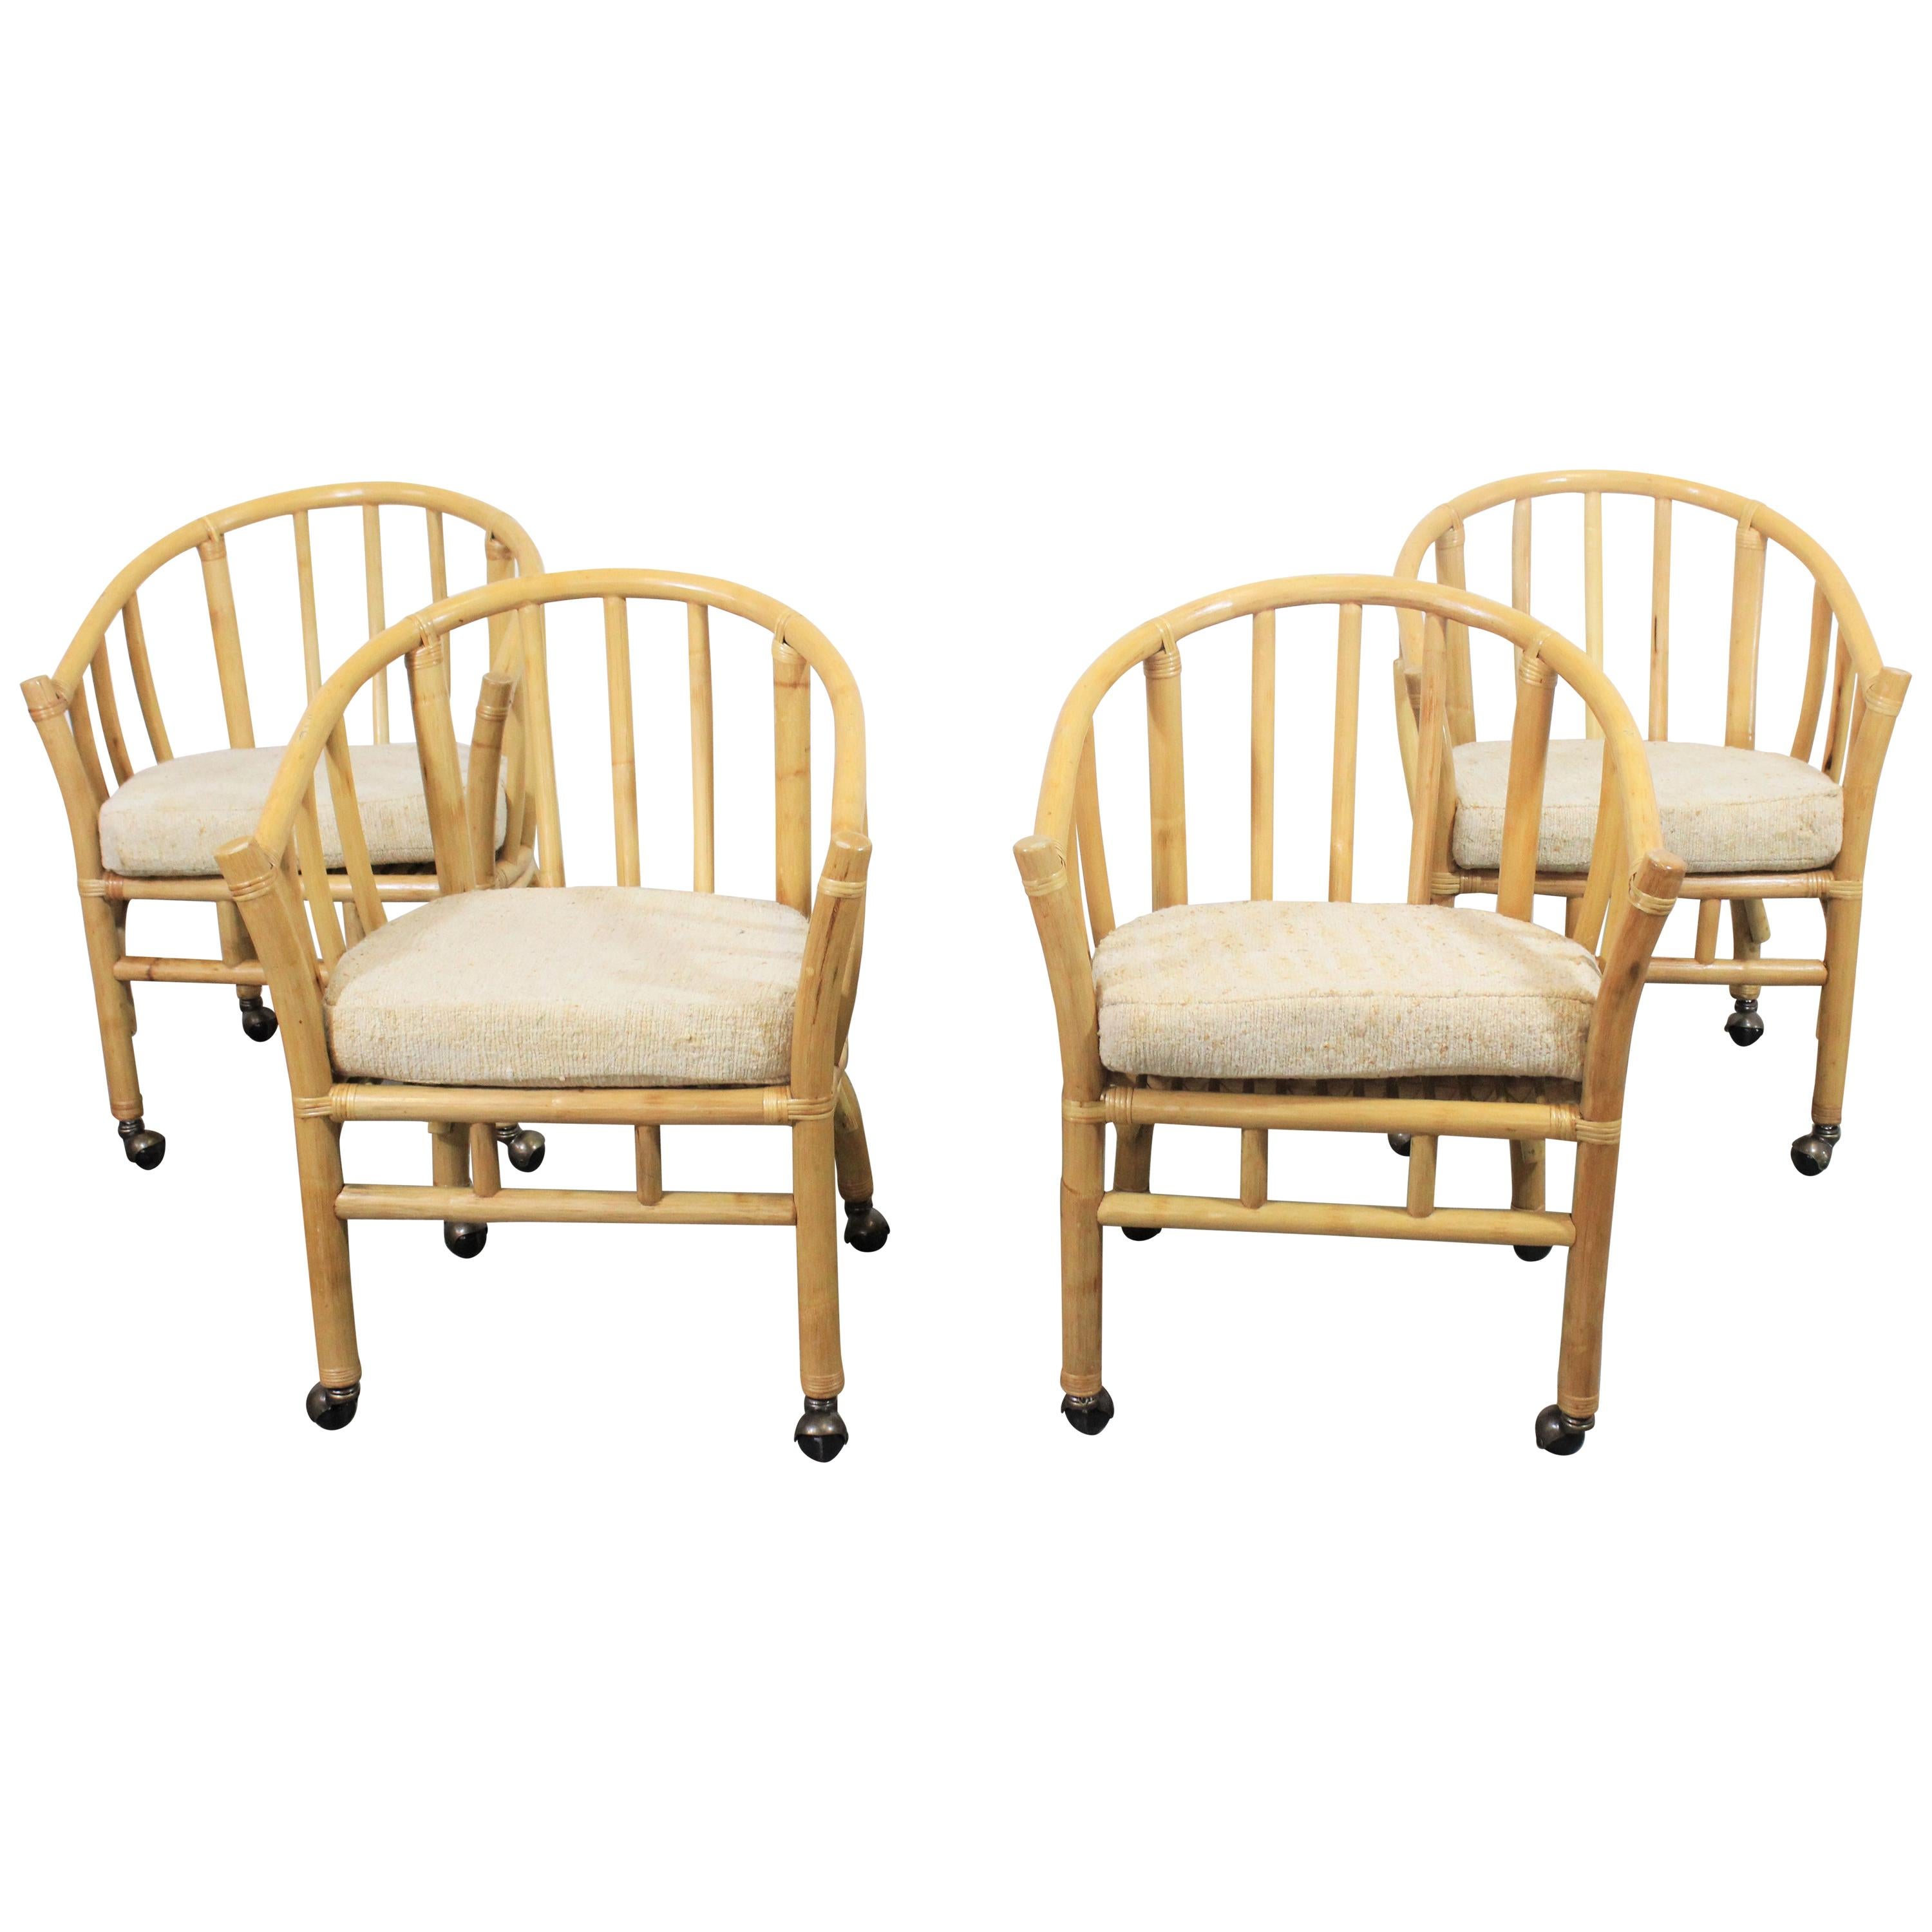 Set of 4 Midcentury Rattan Dining Chairs with Rollers